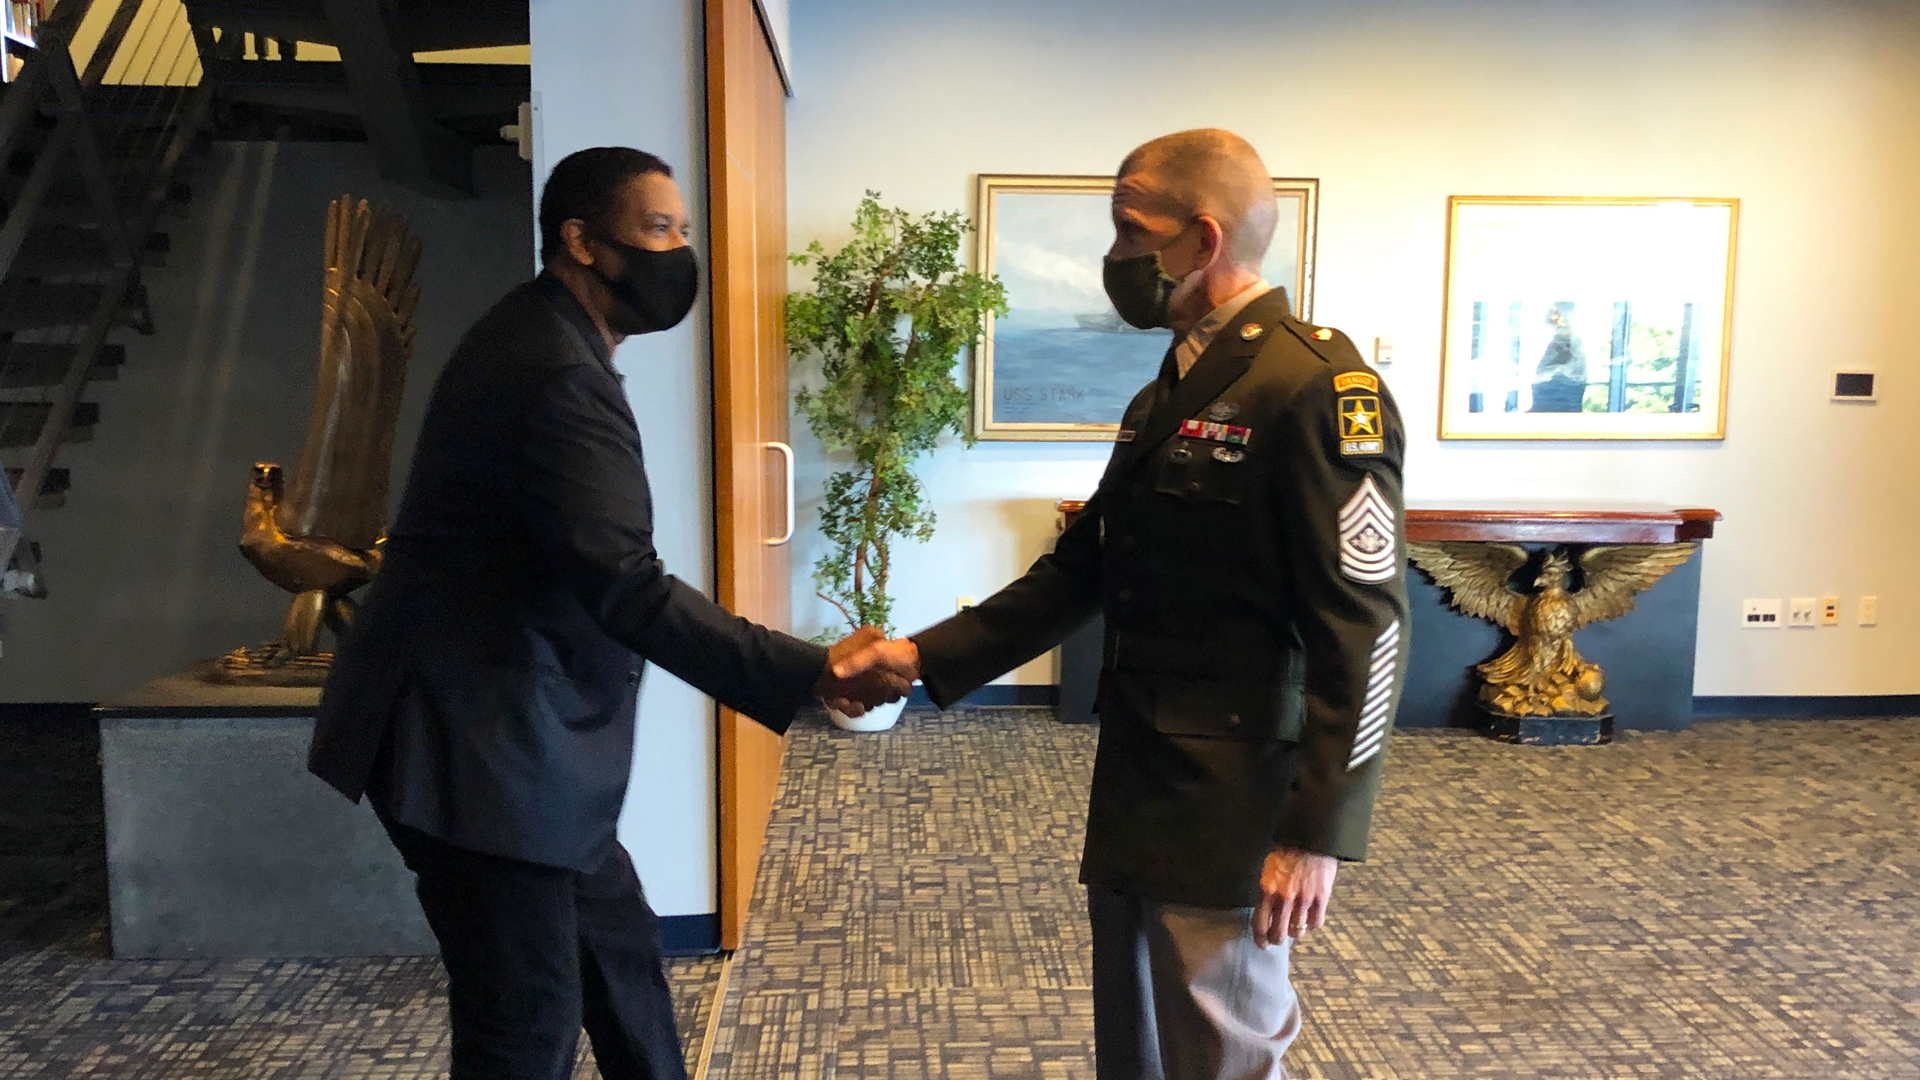 Denzel Washington is the US Army’s newest (honorary) sergeant major